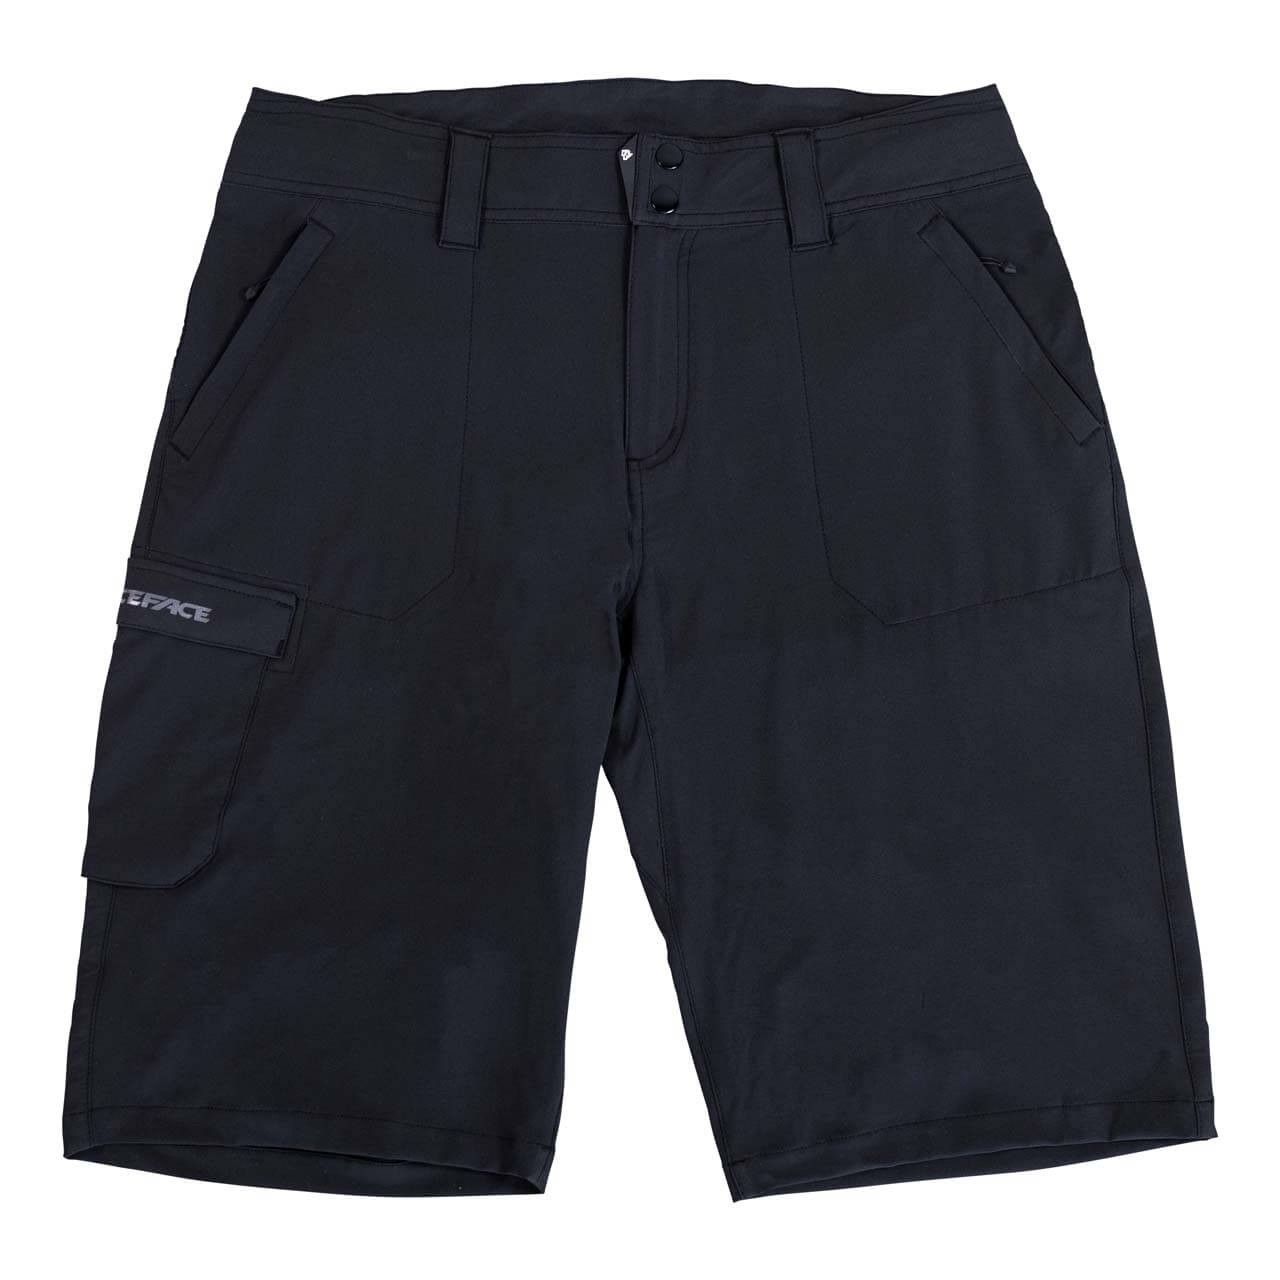 RaceFace Trigger Shorts